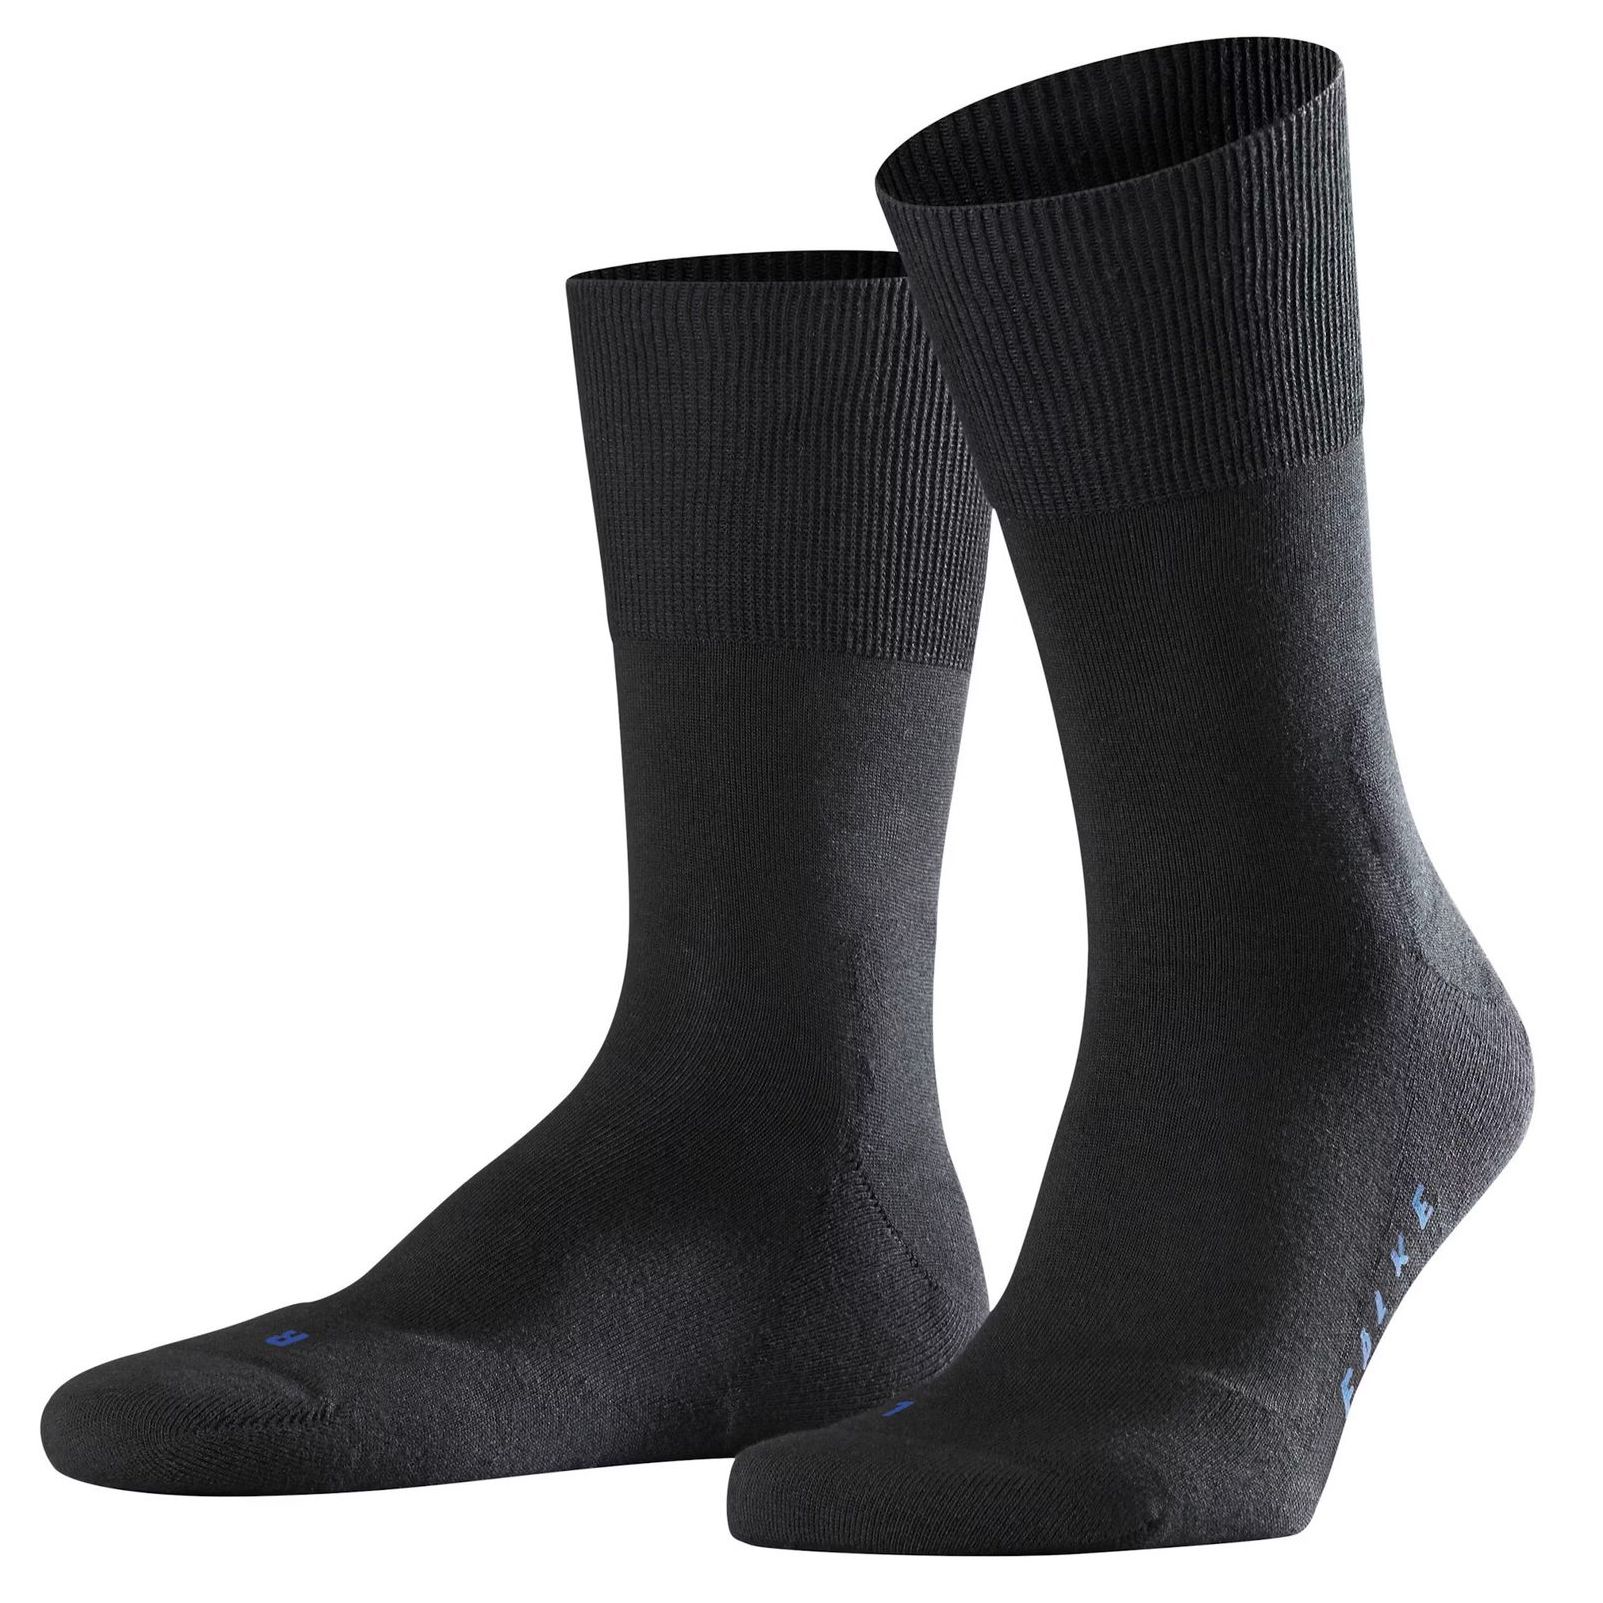 A pair of black socks on a white background